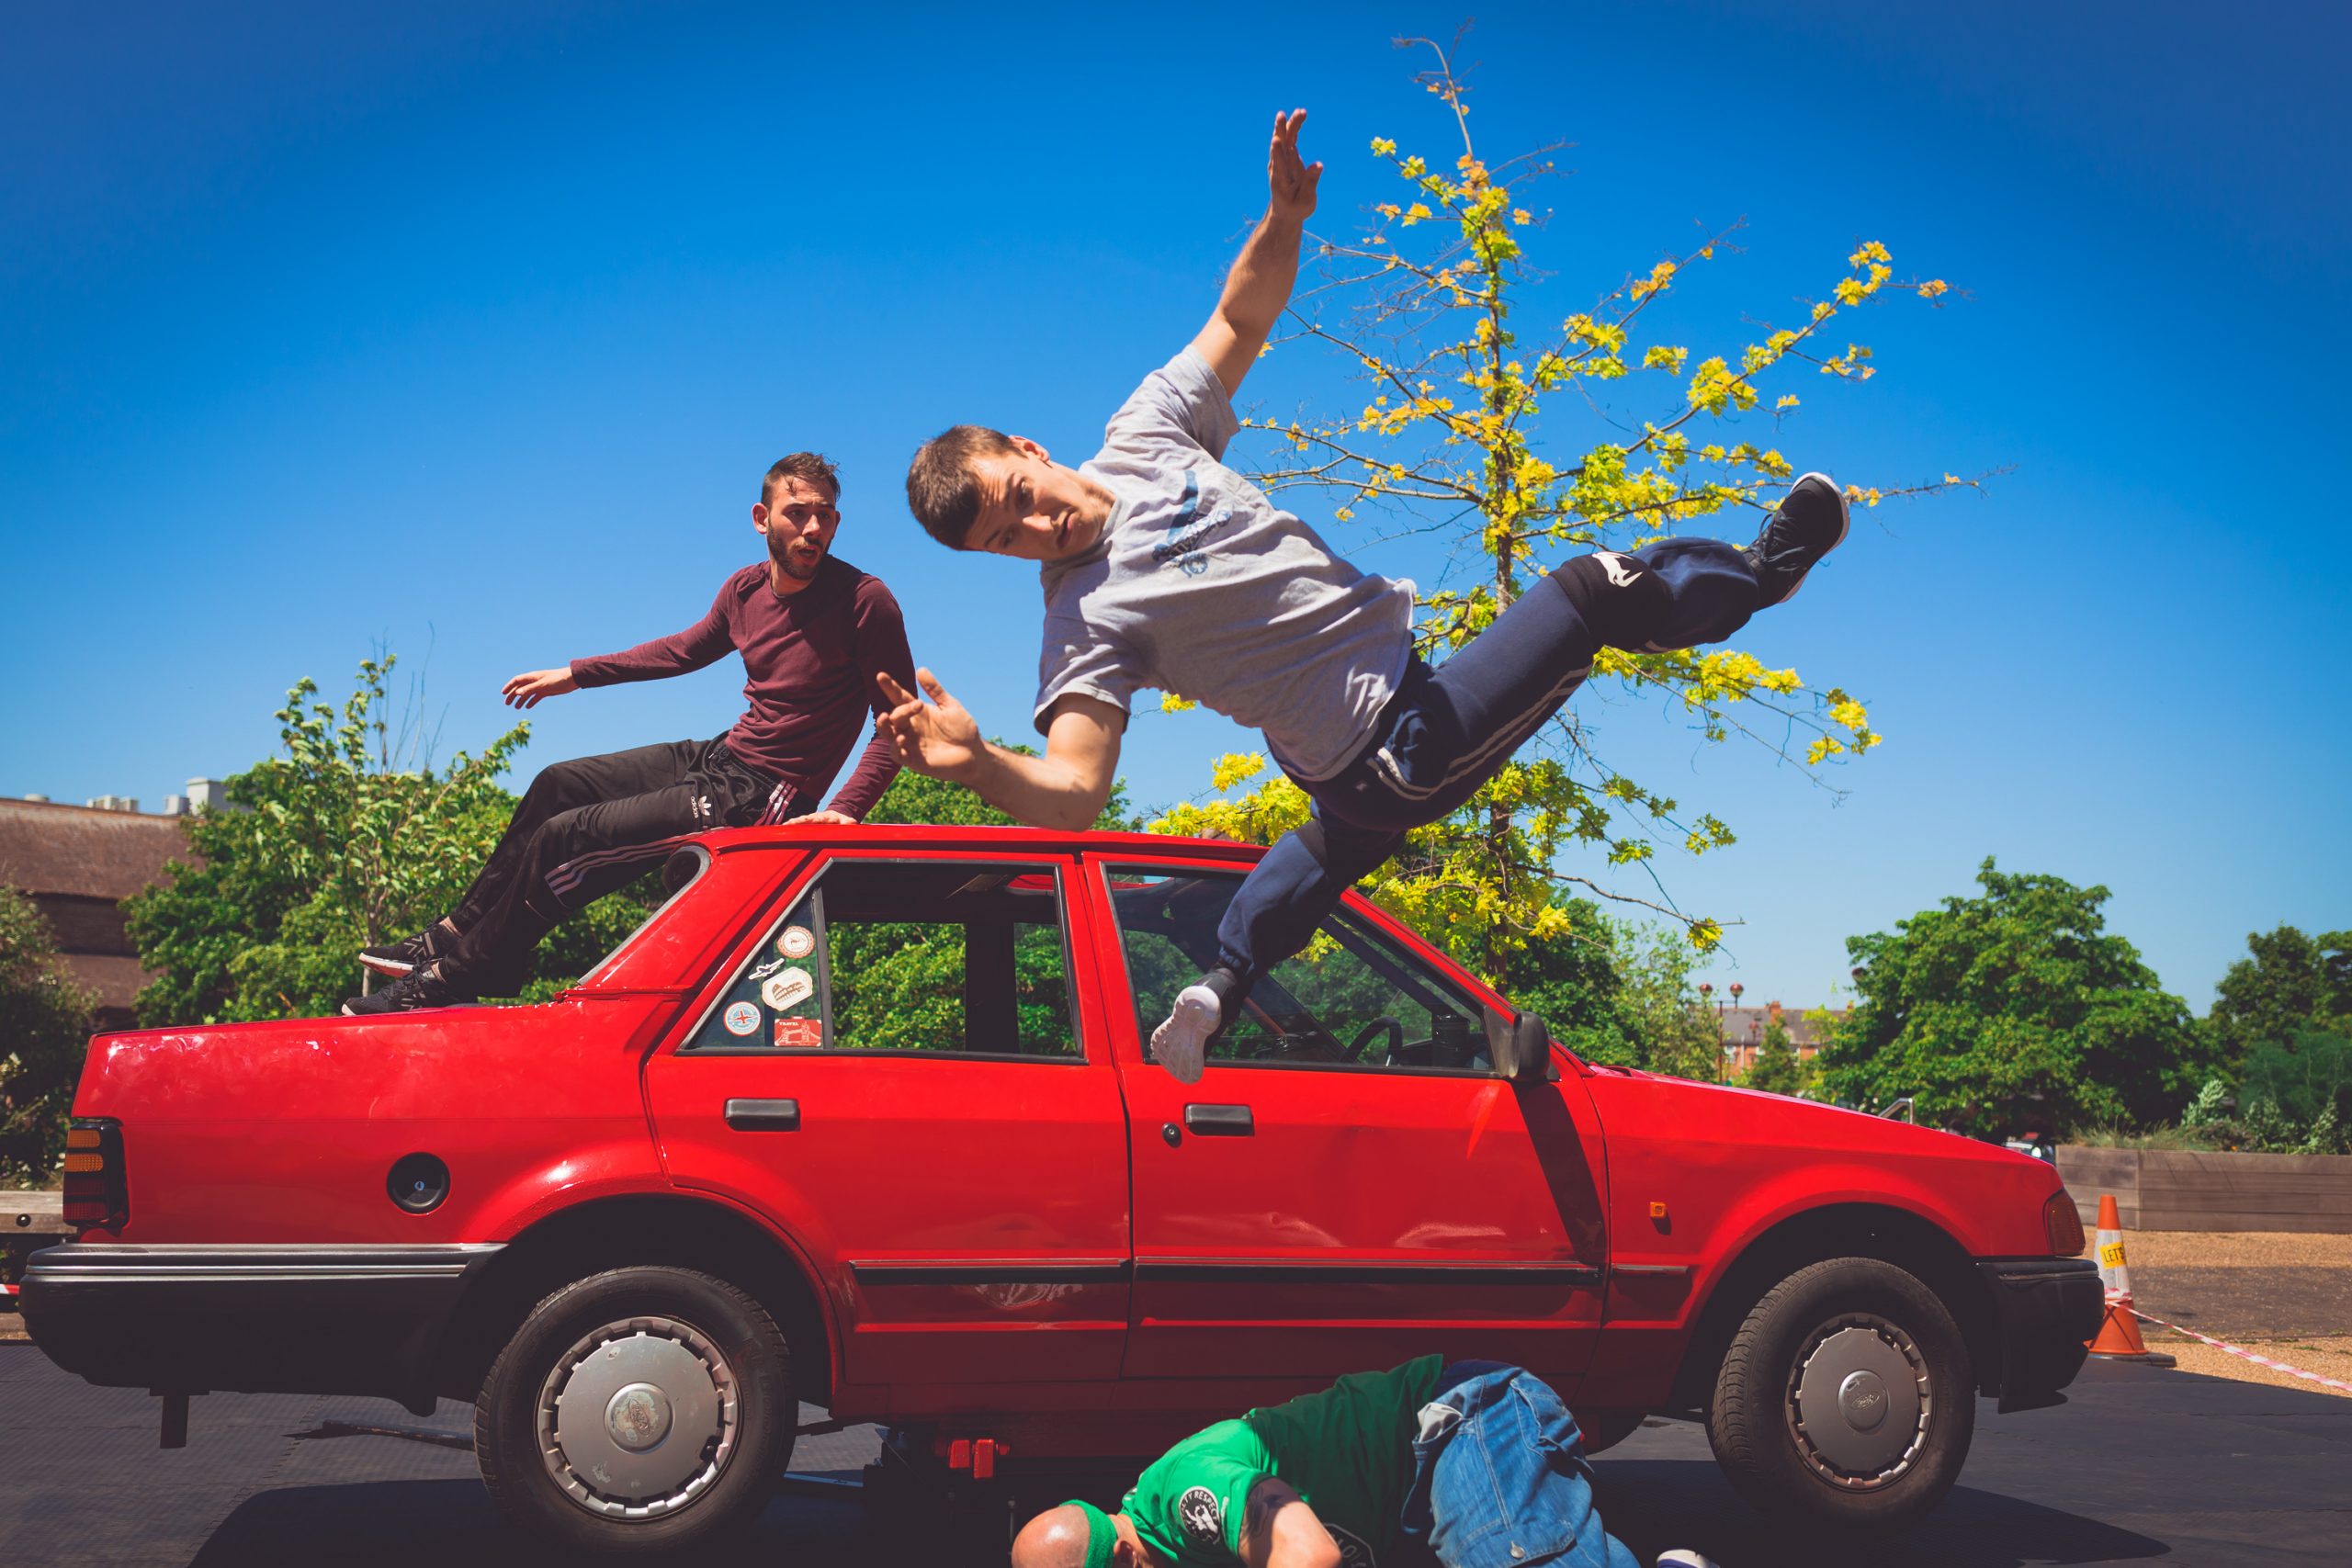 Dancing in mid-air jumping off the side of a red car